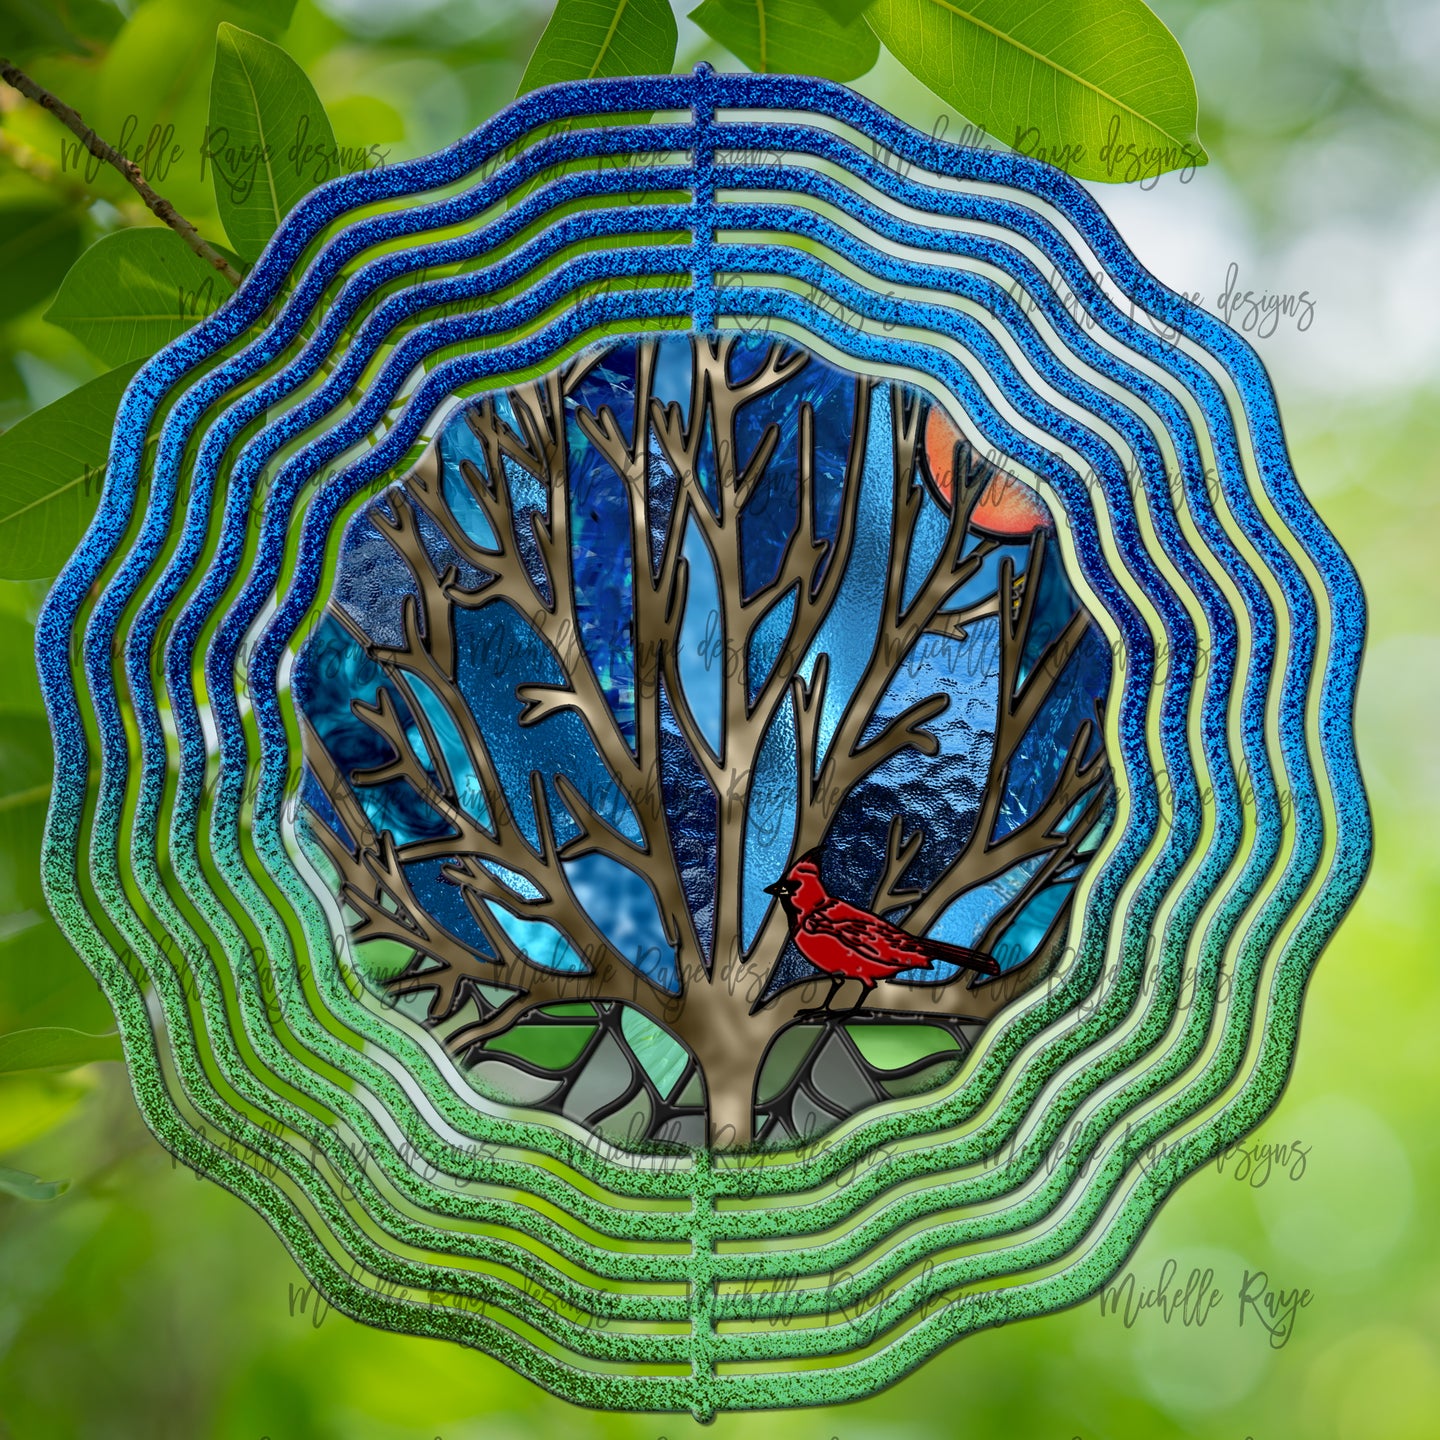 Cardinal Wind Spinner, Stained Glass 10